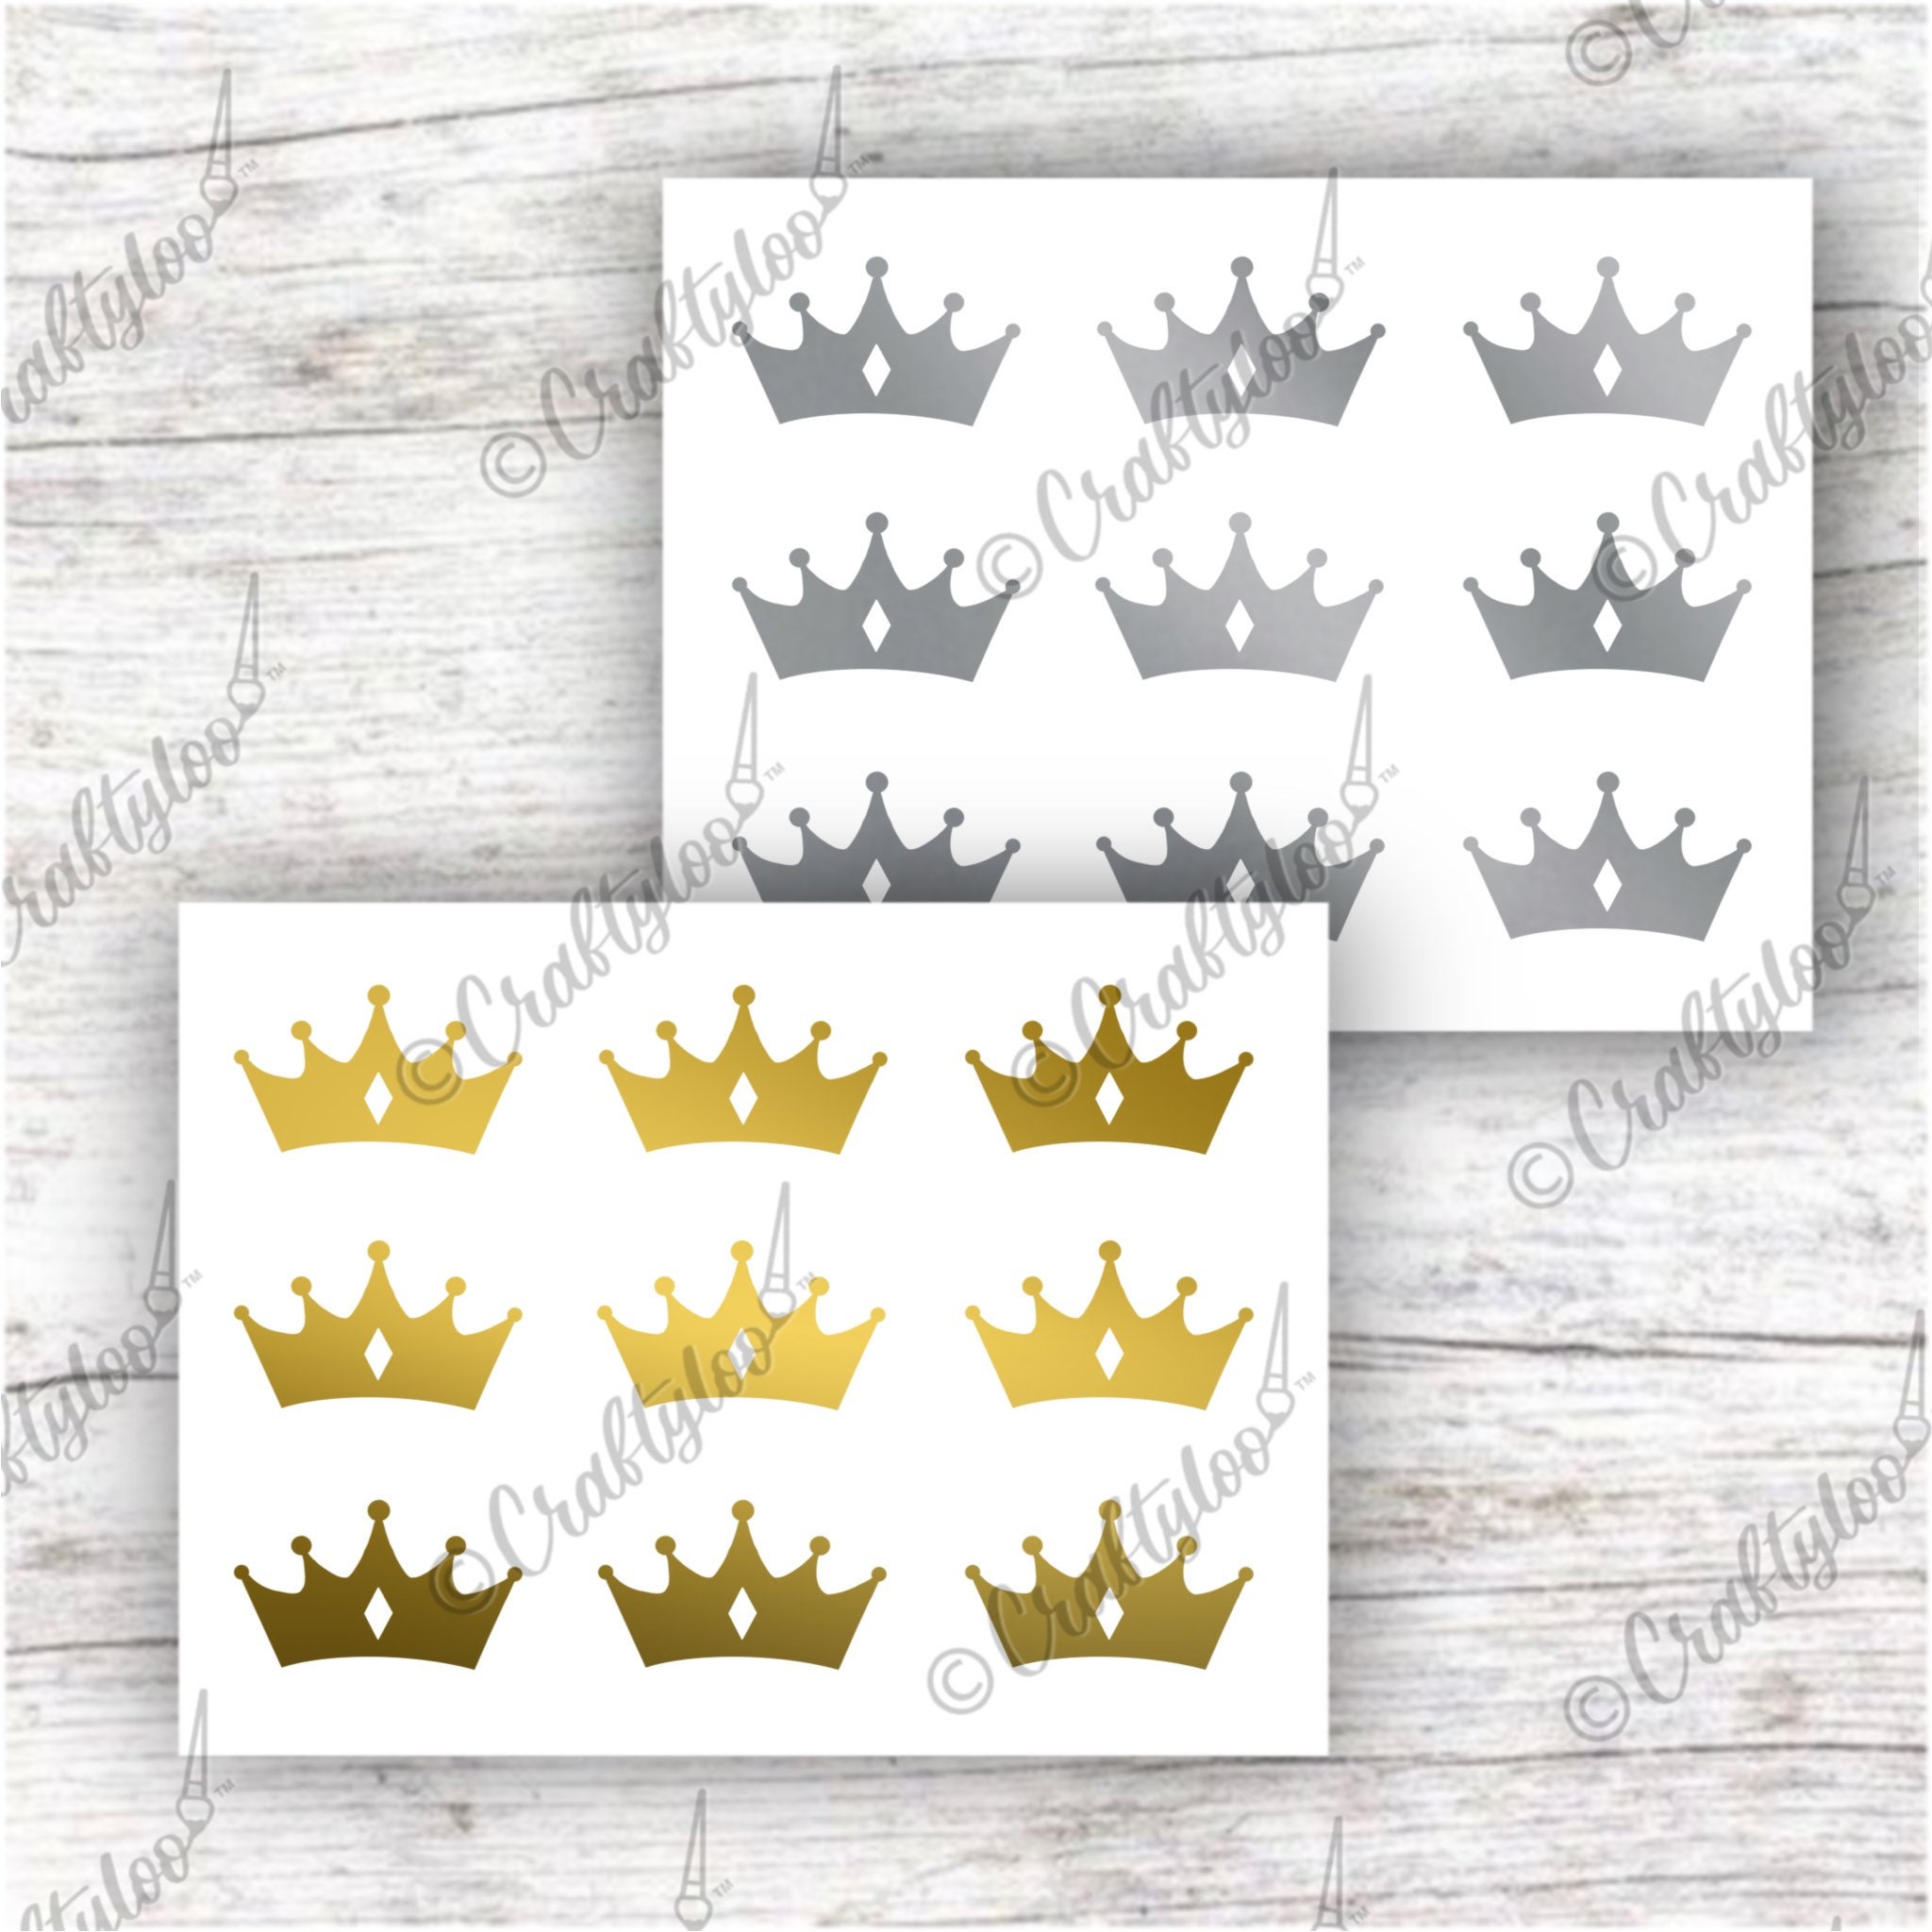 2x King Crown Vinyl Decal Sticker Different colors & size for Cars/Bik –  M&D Stickers